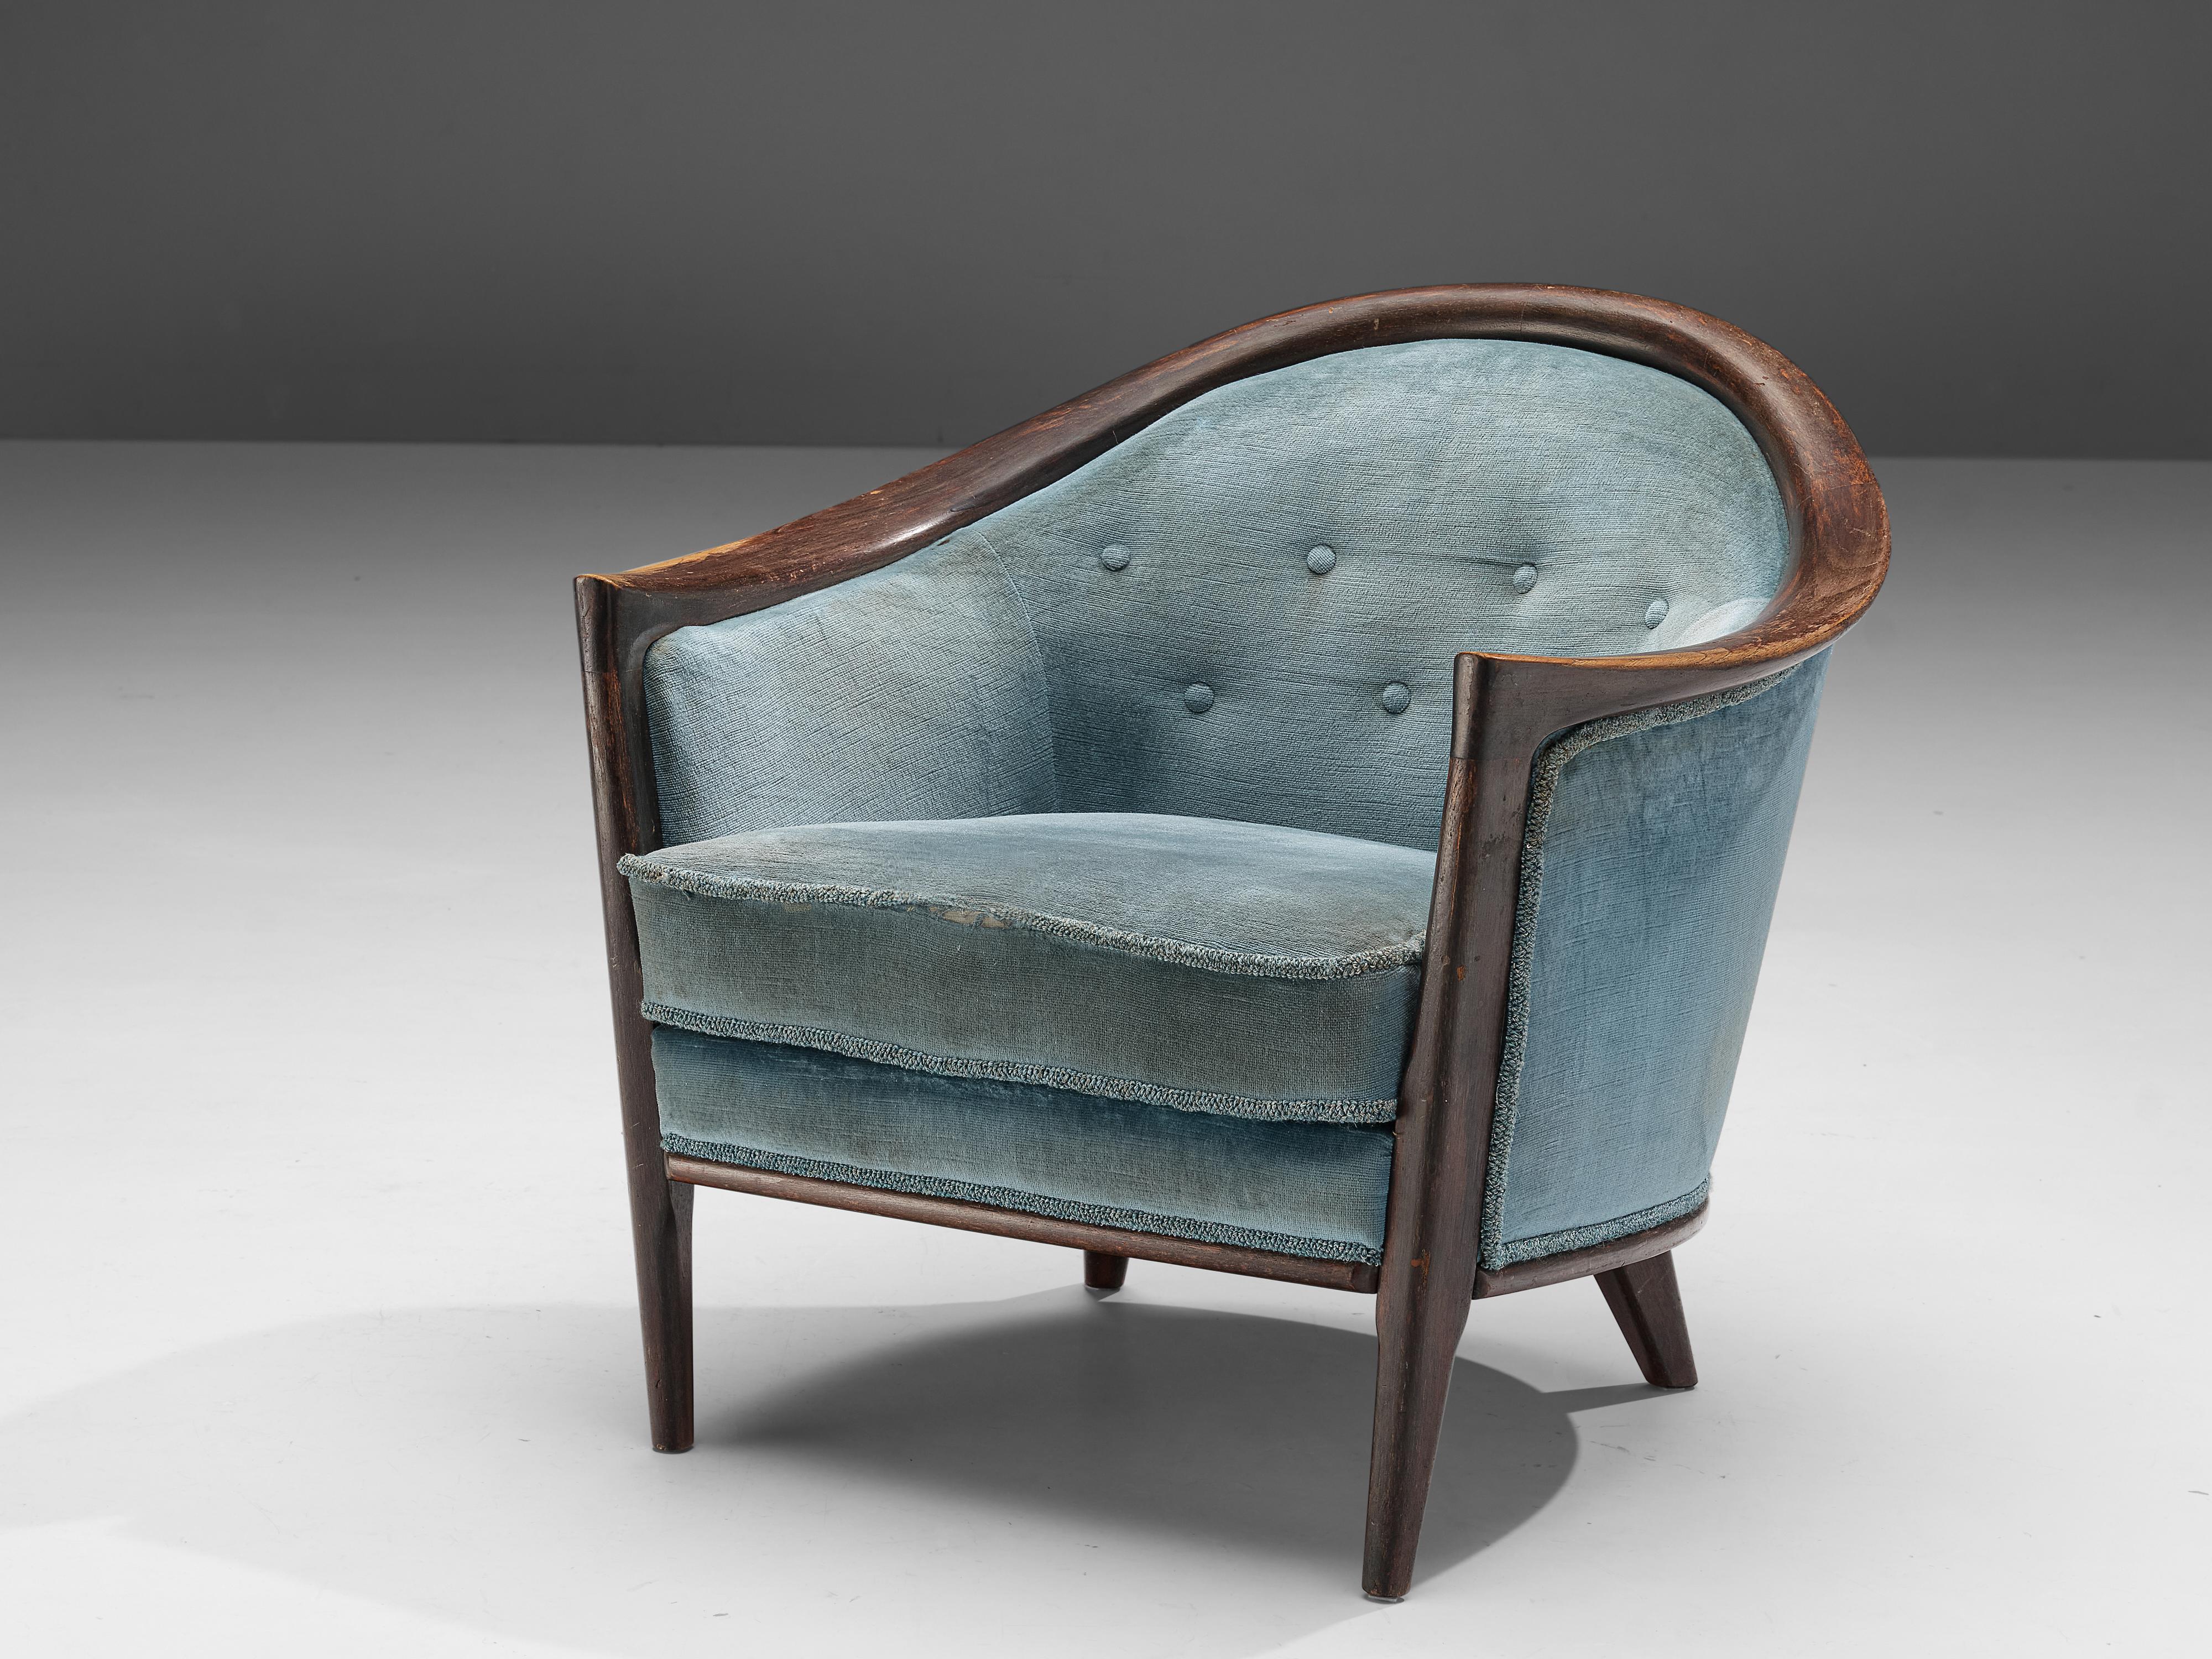 Bröderna Anderssons, lounge chair, velvet, teak, Denmark, 1950s

A deep dark frame in wood curves around the seat and backrest. The chair is upholstered in a soft blue velvet that is tufted. The light color of the blue is in a stunning contrast with